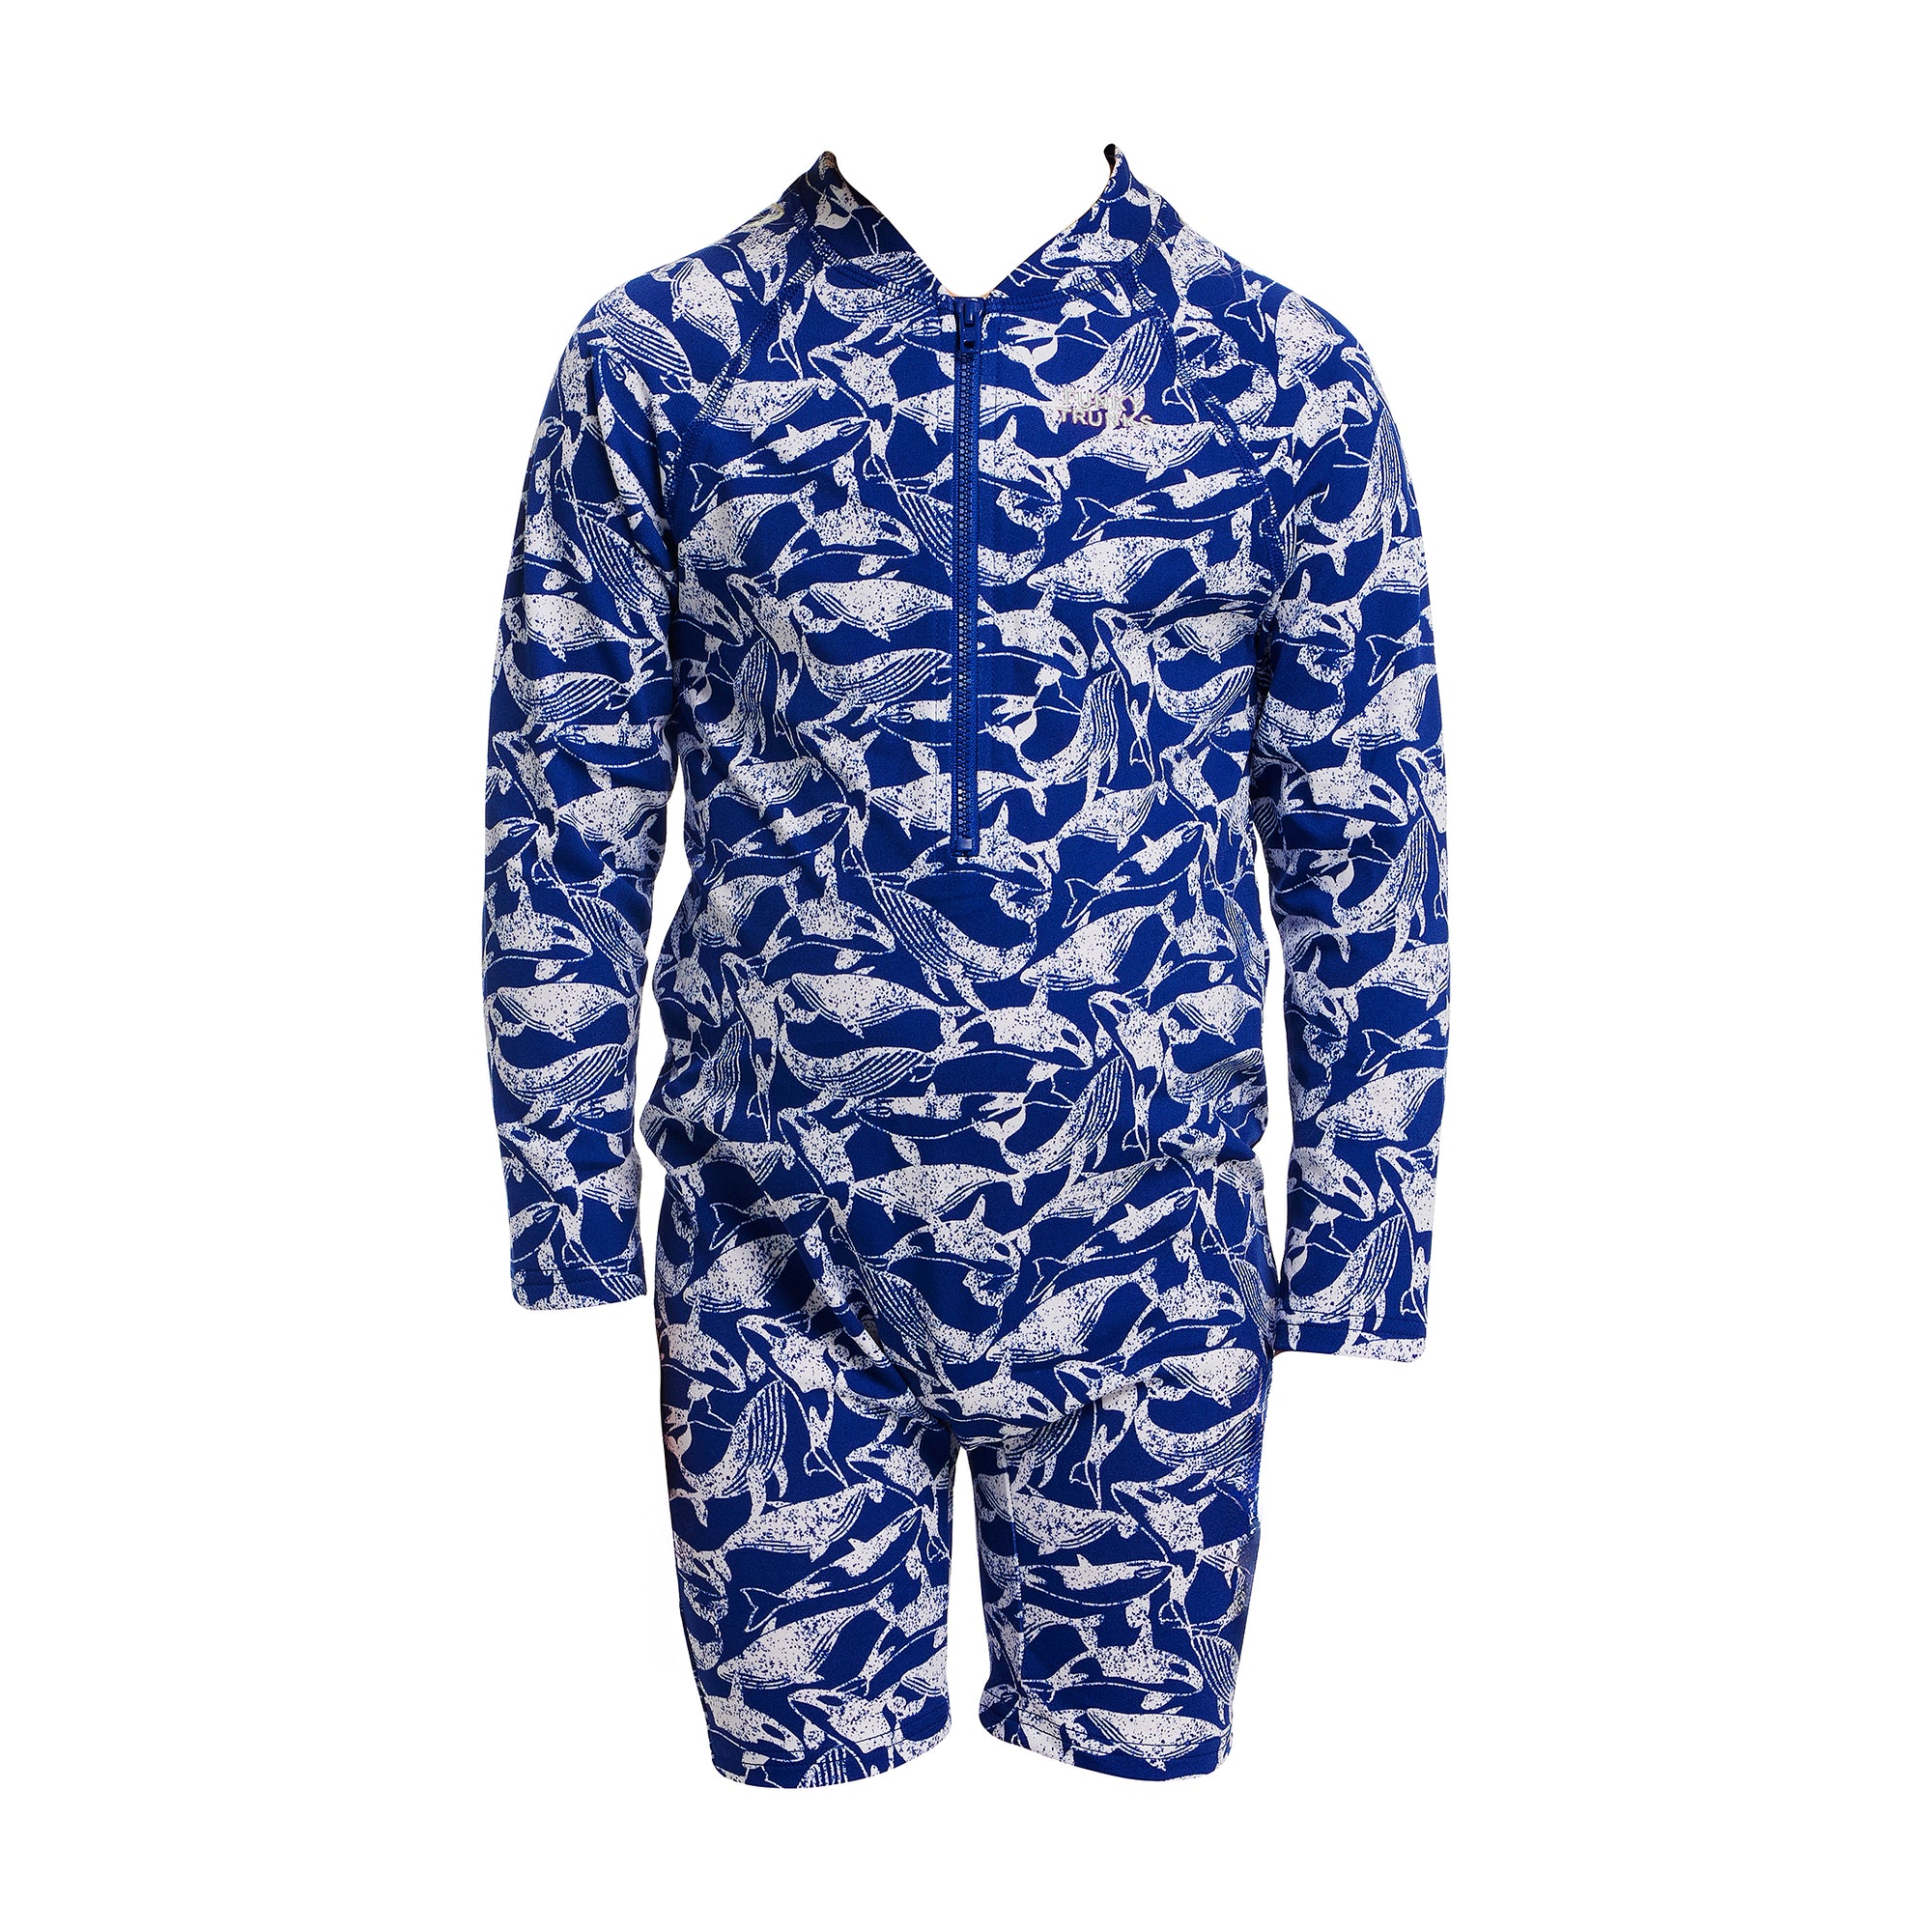 FUNKY TRUNKS - TODDLER BOYS GO JUMP SUIT - Beached Bro